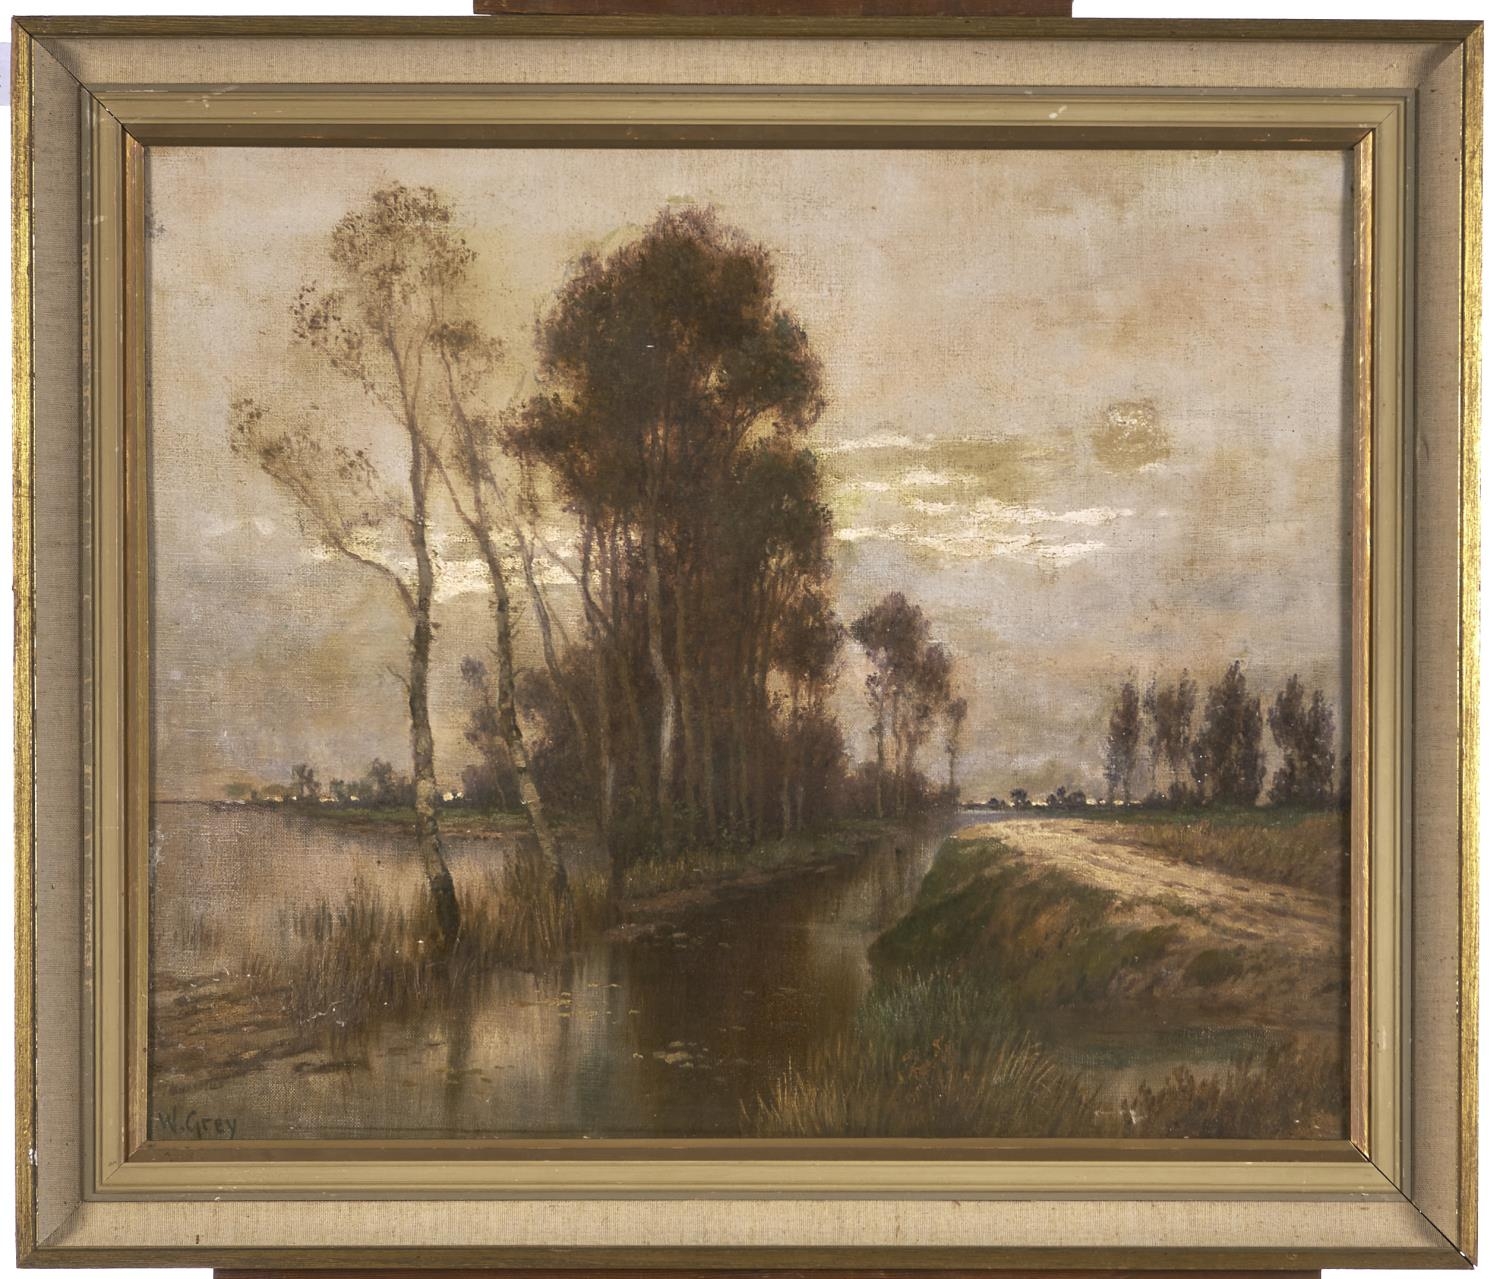 W Grey, late 19th / early 20th c - Silver Birches in a Watery Landscape, signed, oil on canvas, 47